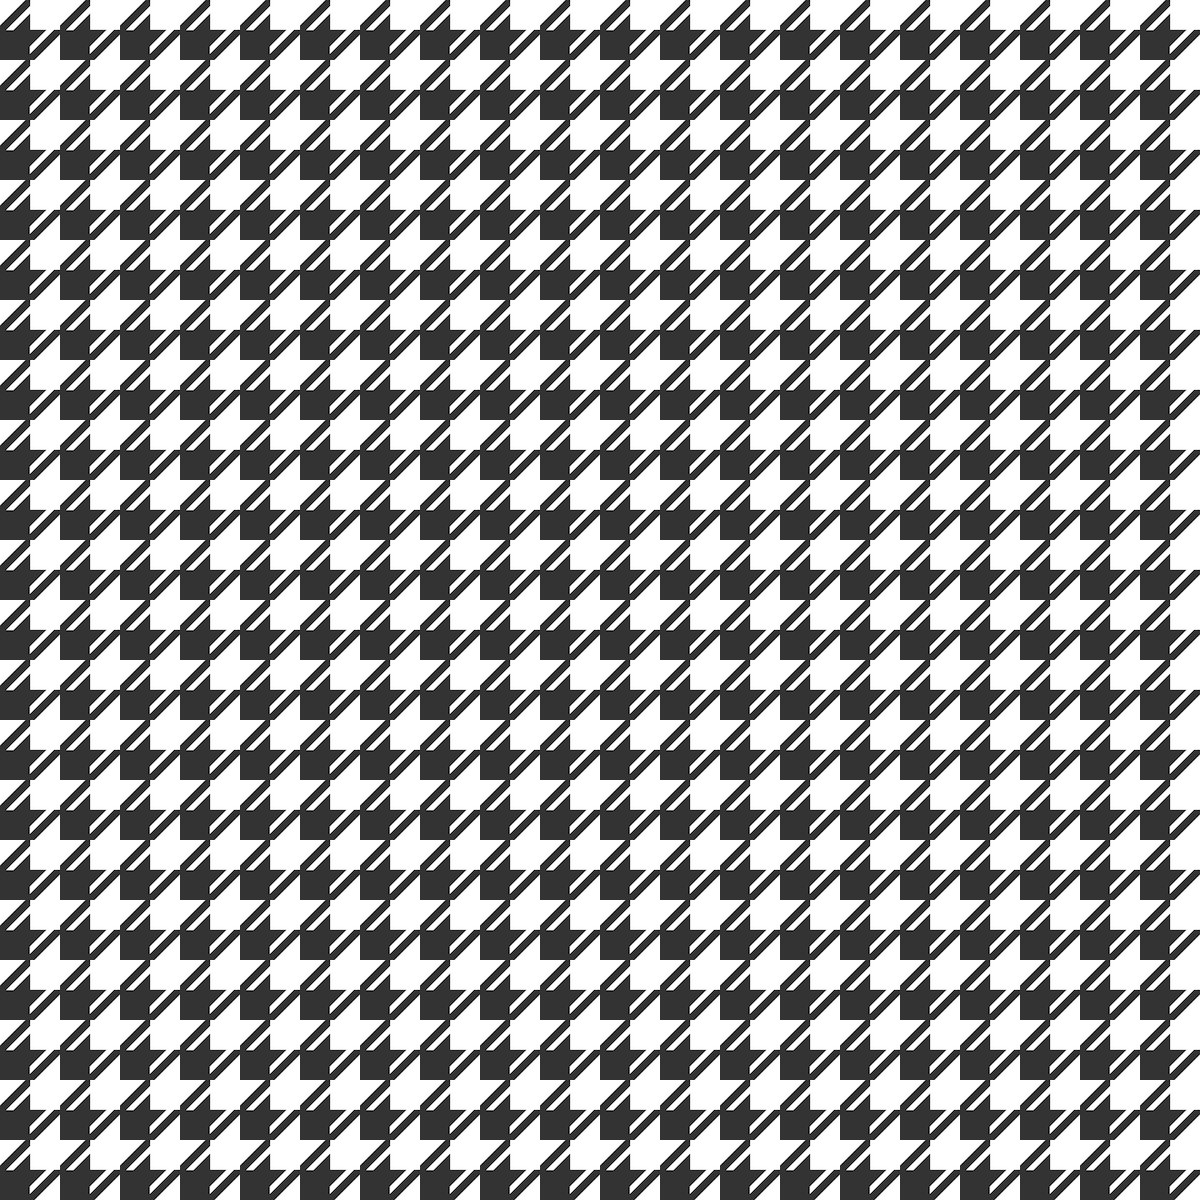 Black And White Checkered Printable Paper - Get What You Need For Free